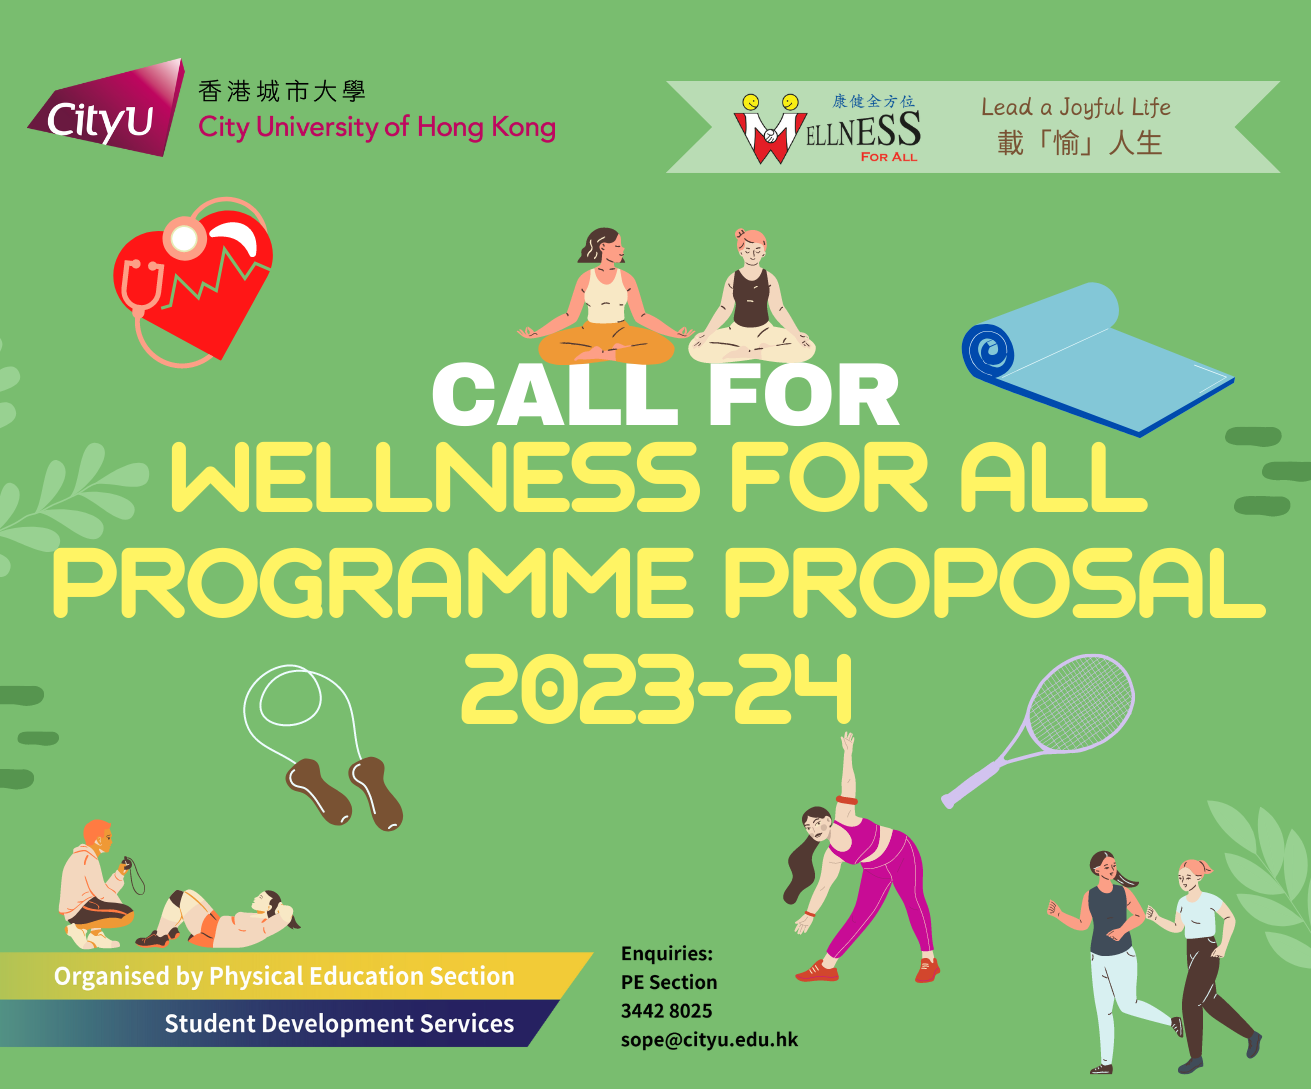 Call for Wellness Programme Proposal 23-24 